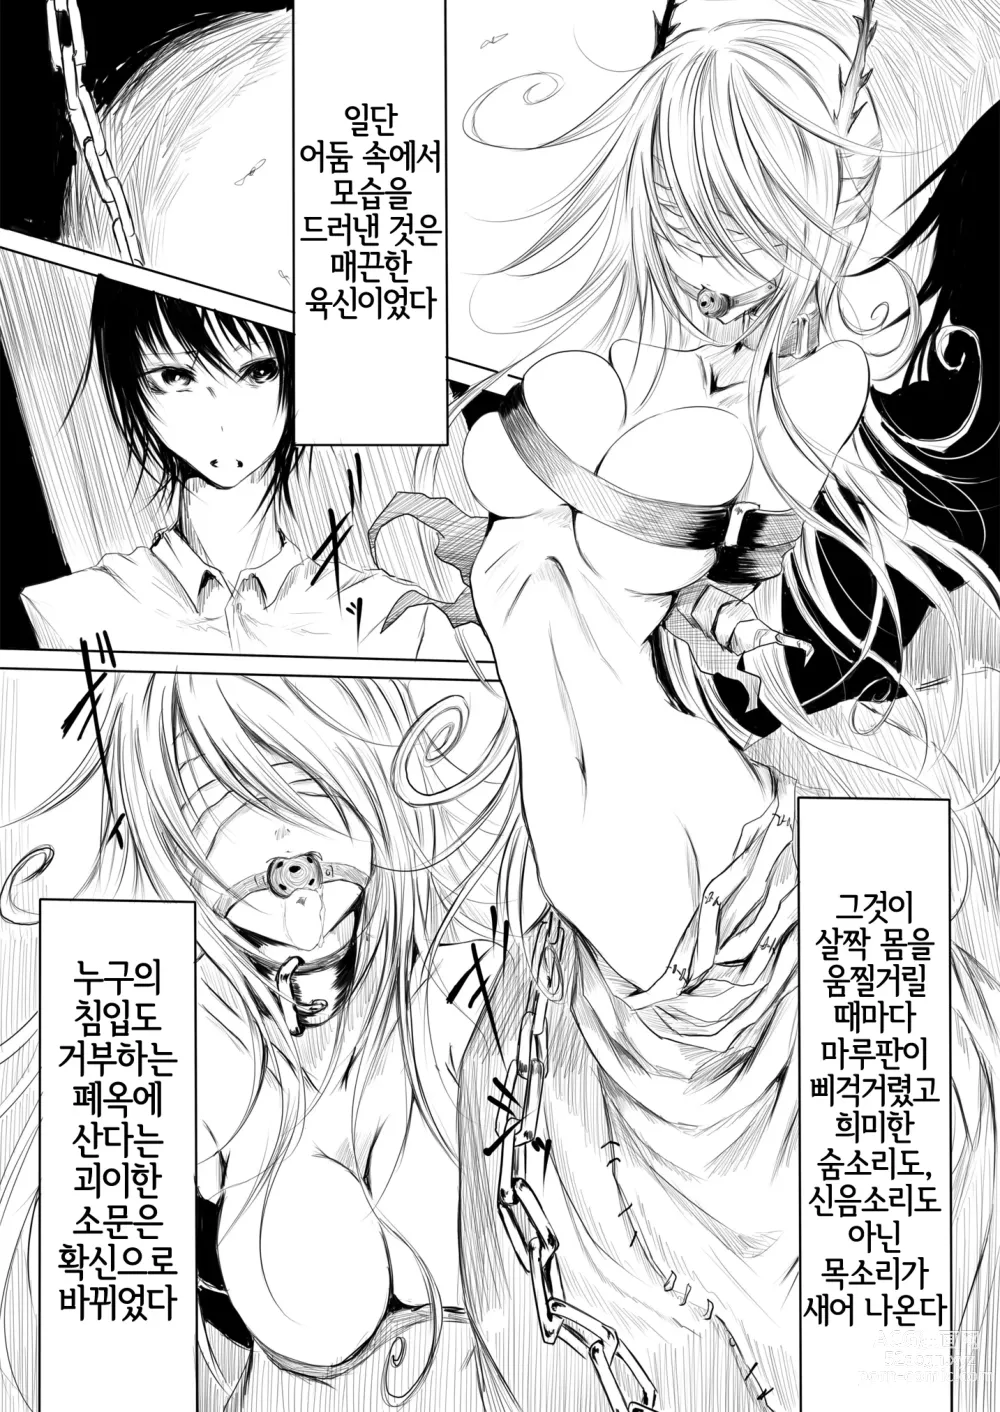 Page 3 of doujinshi A Reckless Worm Lady｜망양충